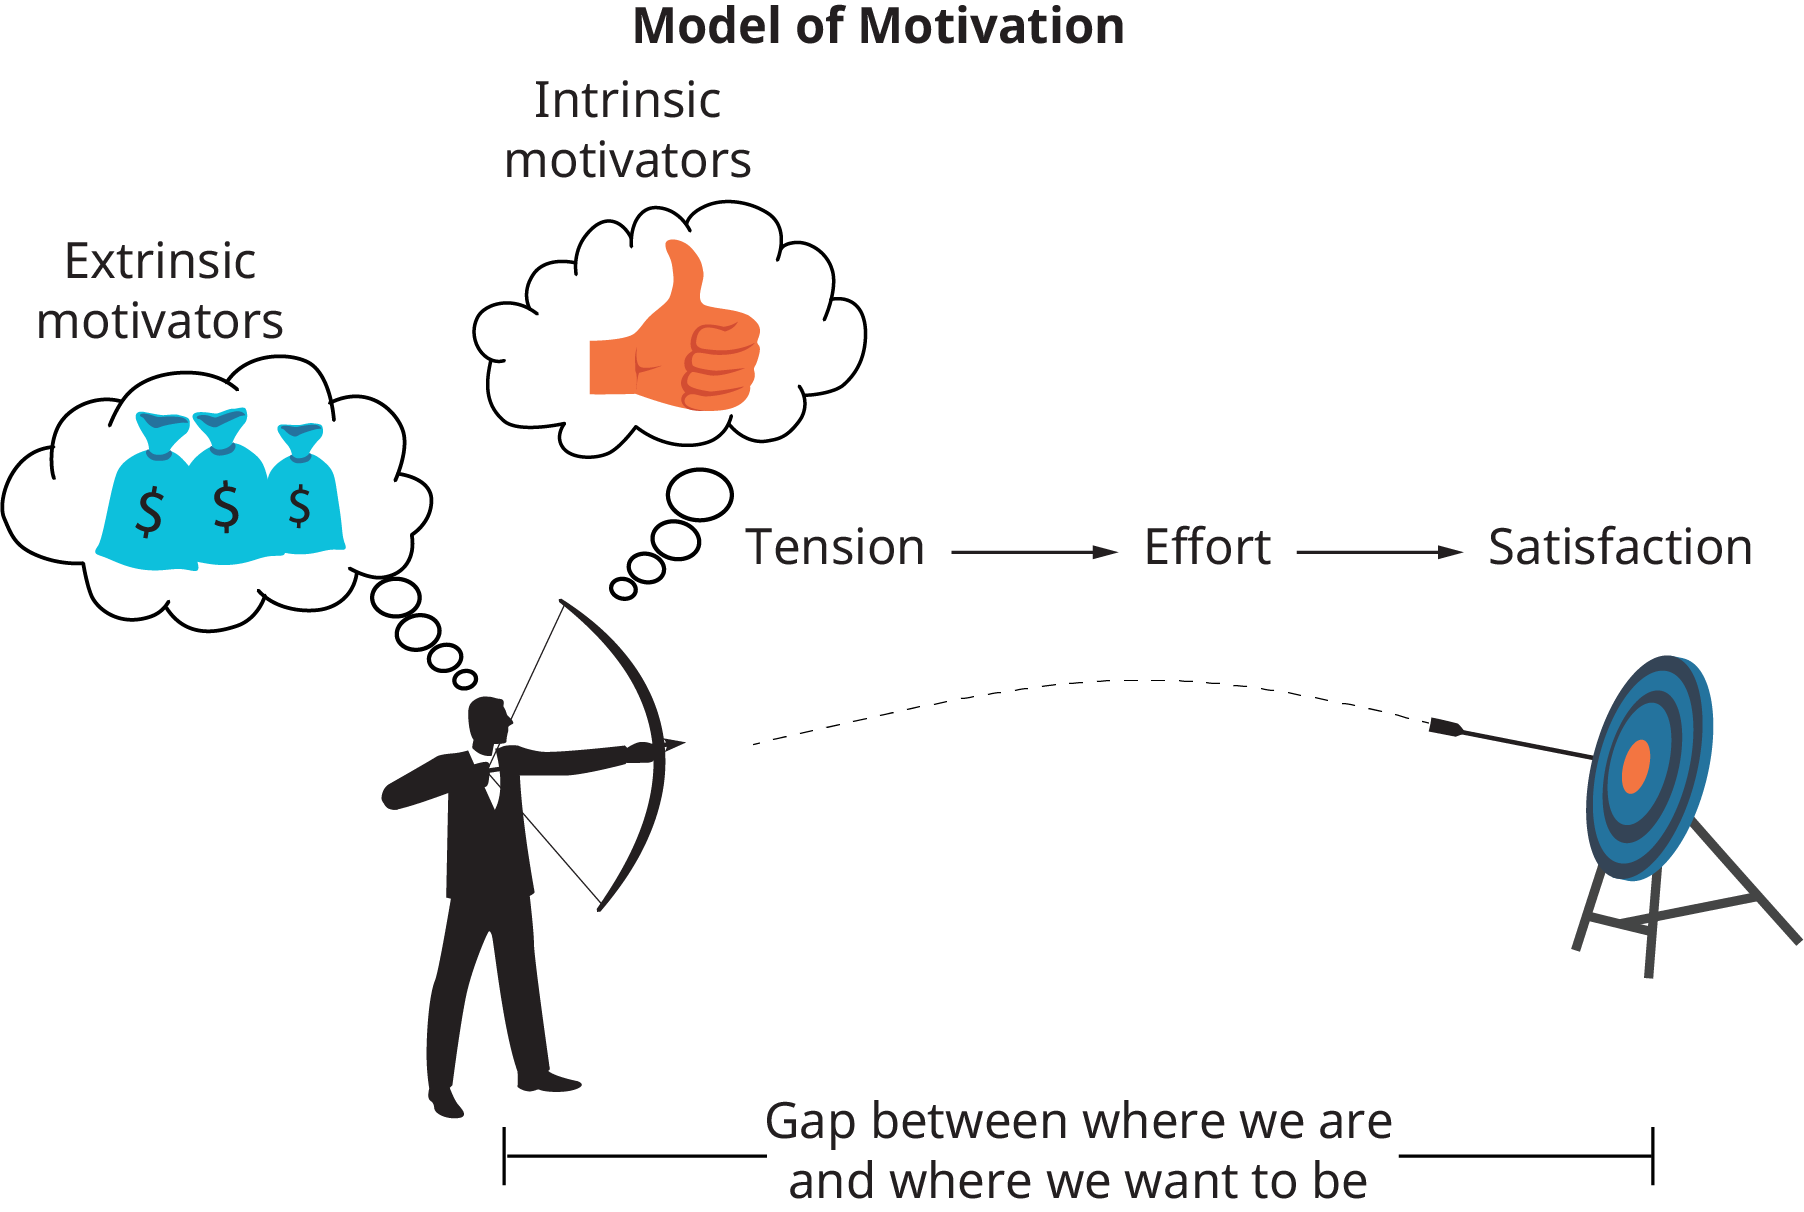 The illustration shows a man holding a bow and arrow; it is aimed at a target. There are 2 thought bubbles above the man; the first is extrinsic motivators, shown as money. The second is intrinsic motivators, shown as a thumbs up. Between the man and the target there is a bracket that reads, gap between where we are and where we and where we want to be. From left to right, the word tension flows into effort, which flows into satisfaction.